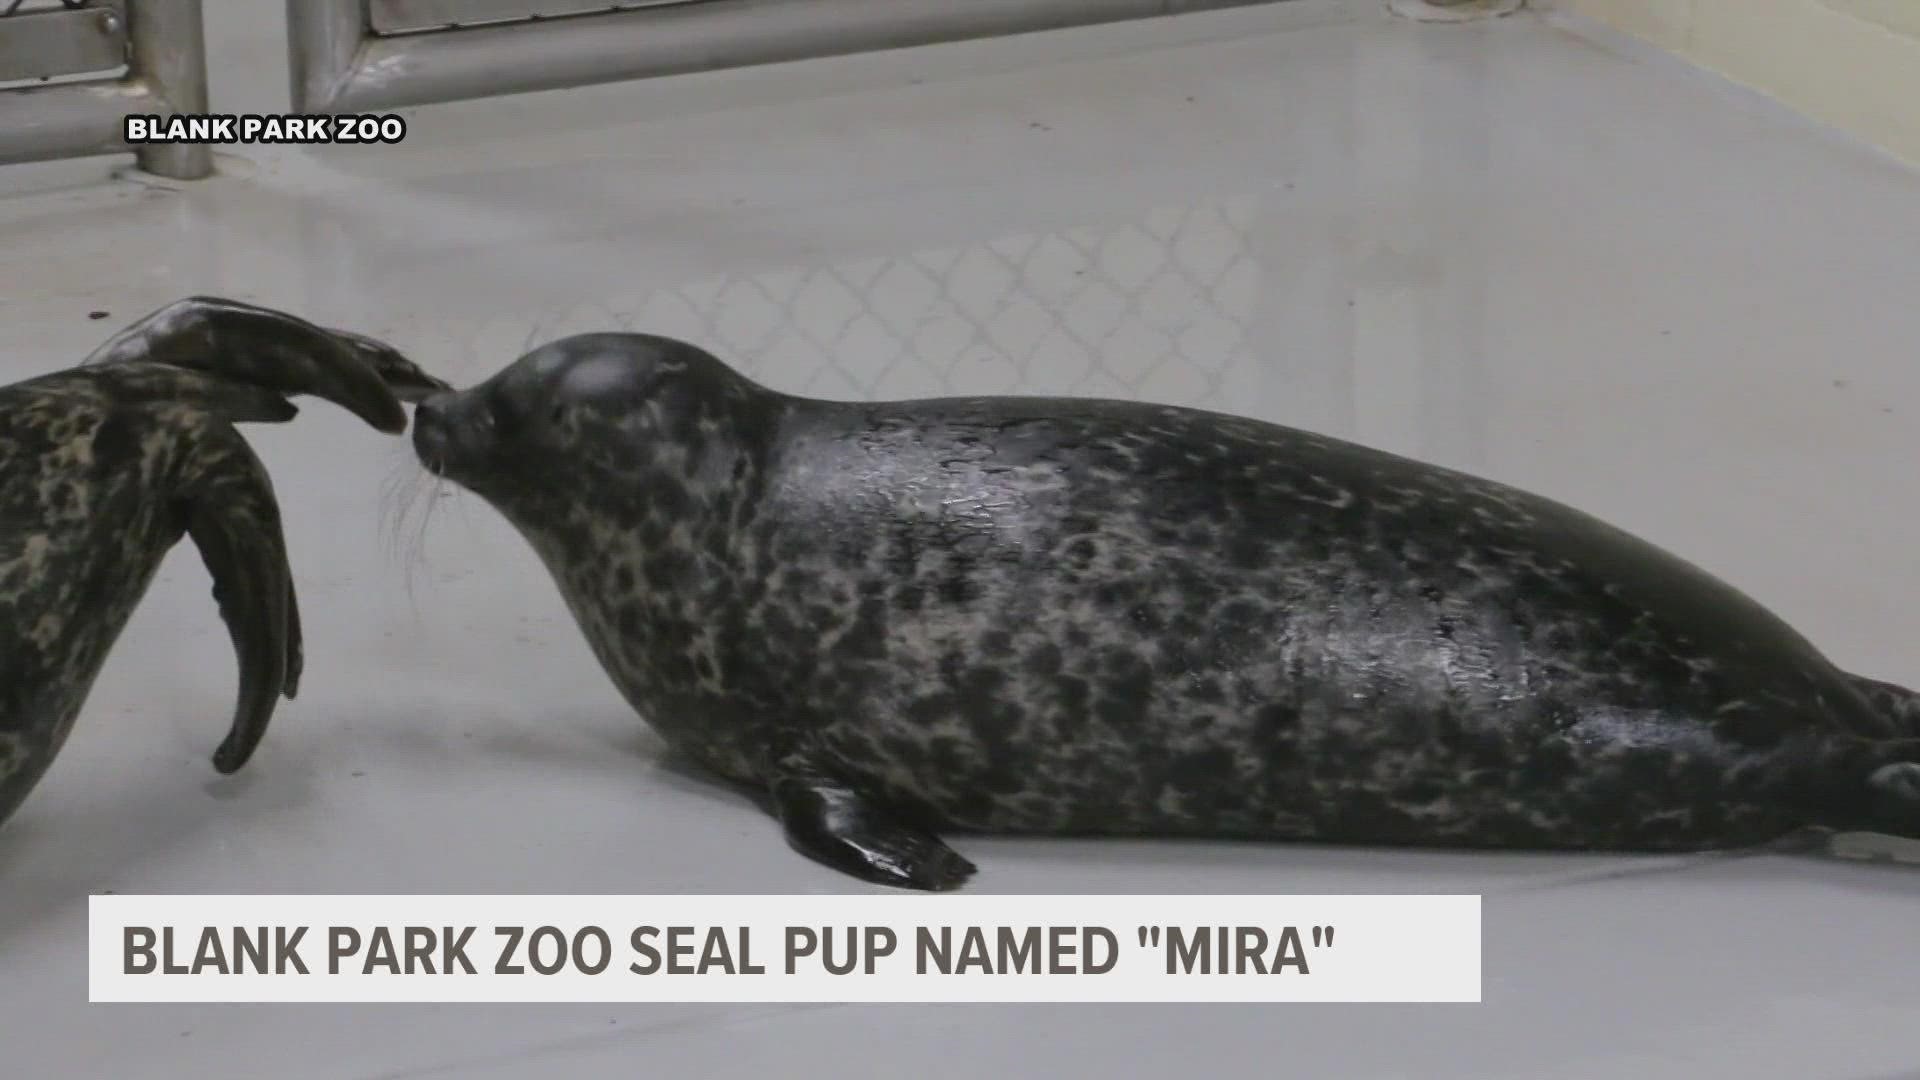 800+ votes were cast to pick the winning name from the following options: Brooks, Mira, Siku and Remi.